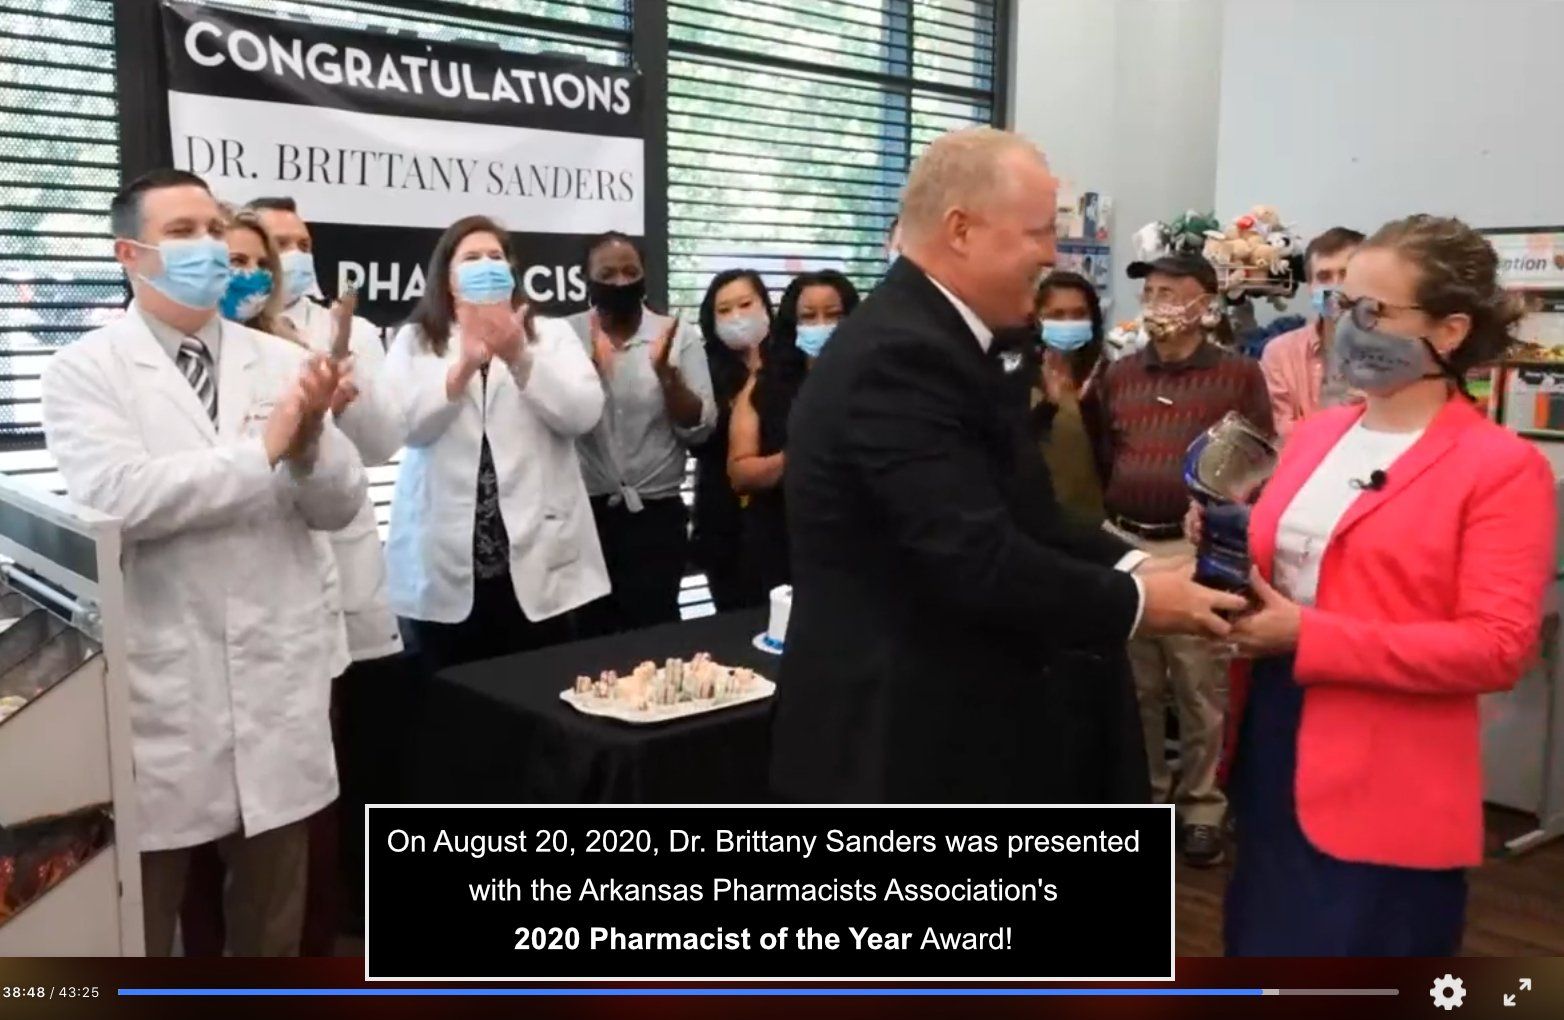 Dr. Brittany Sanders awareded 2020 Pharmacist of the Year